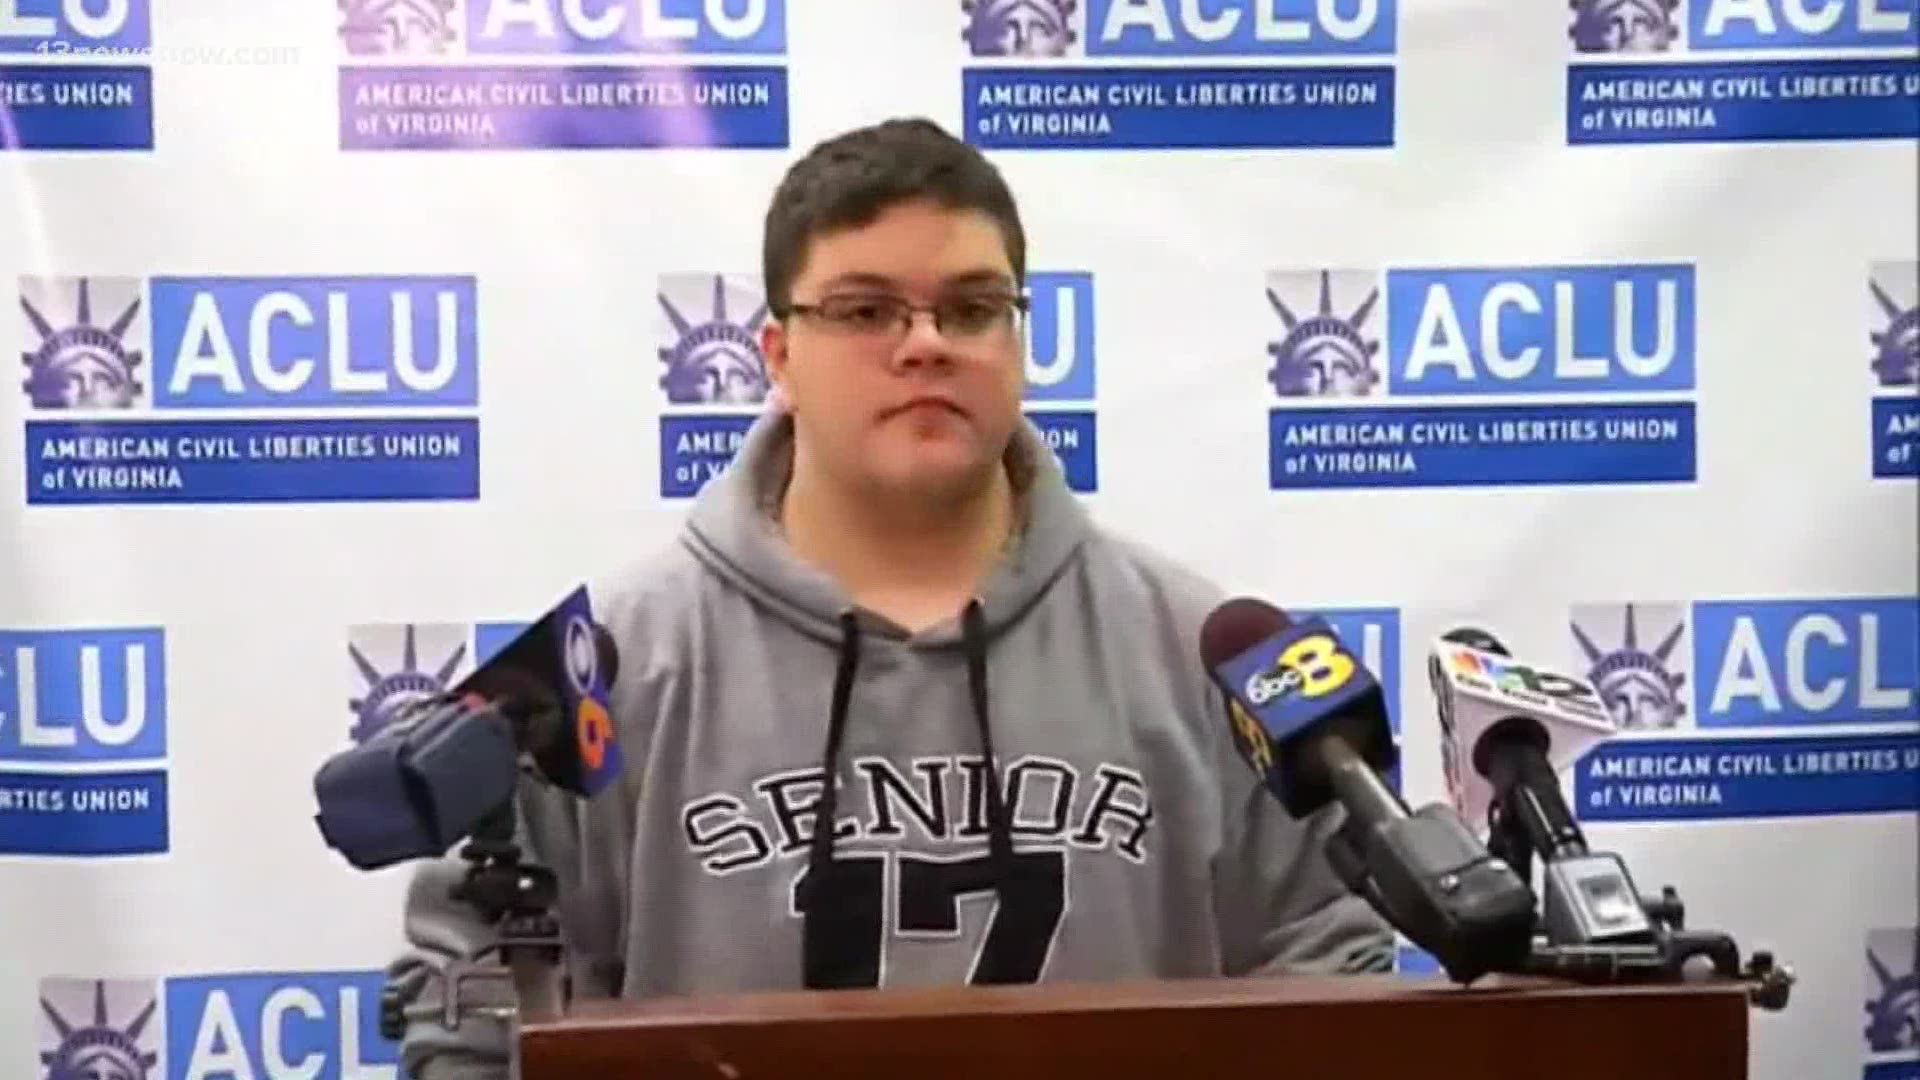 It's the latest update in a several years-long series of court cases, where former student Gavin Grimm said he should have been able to use the men's bathroom.